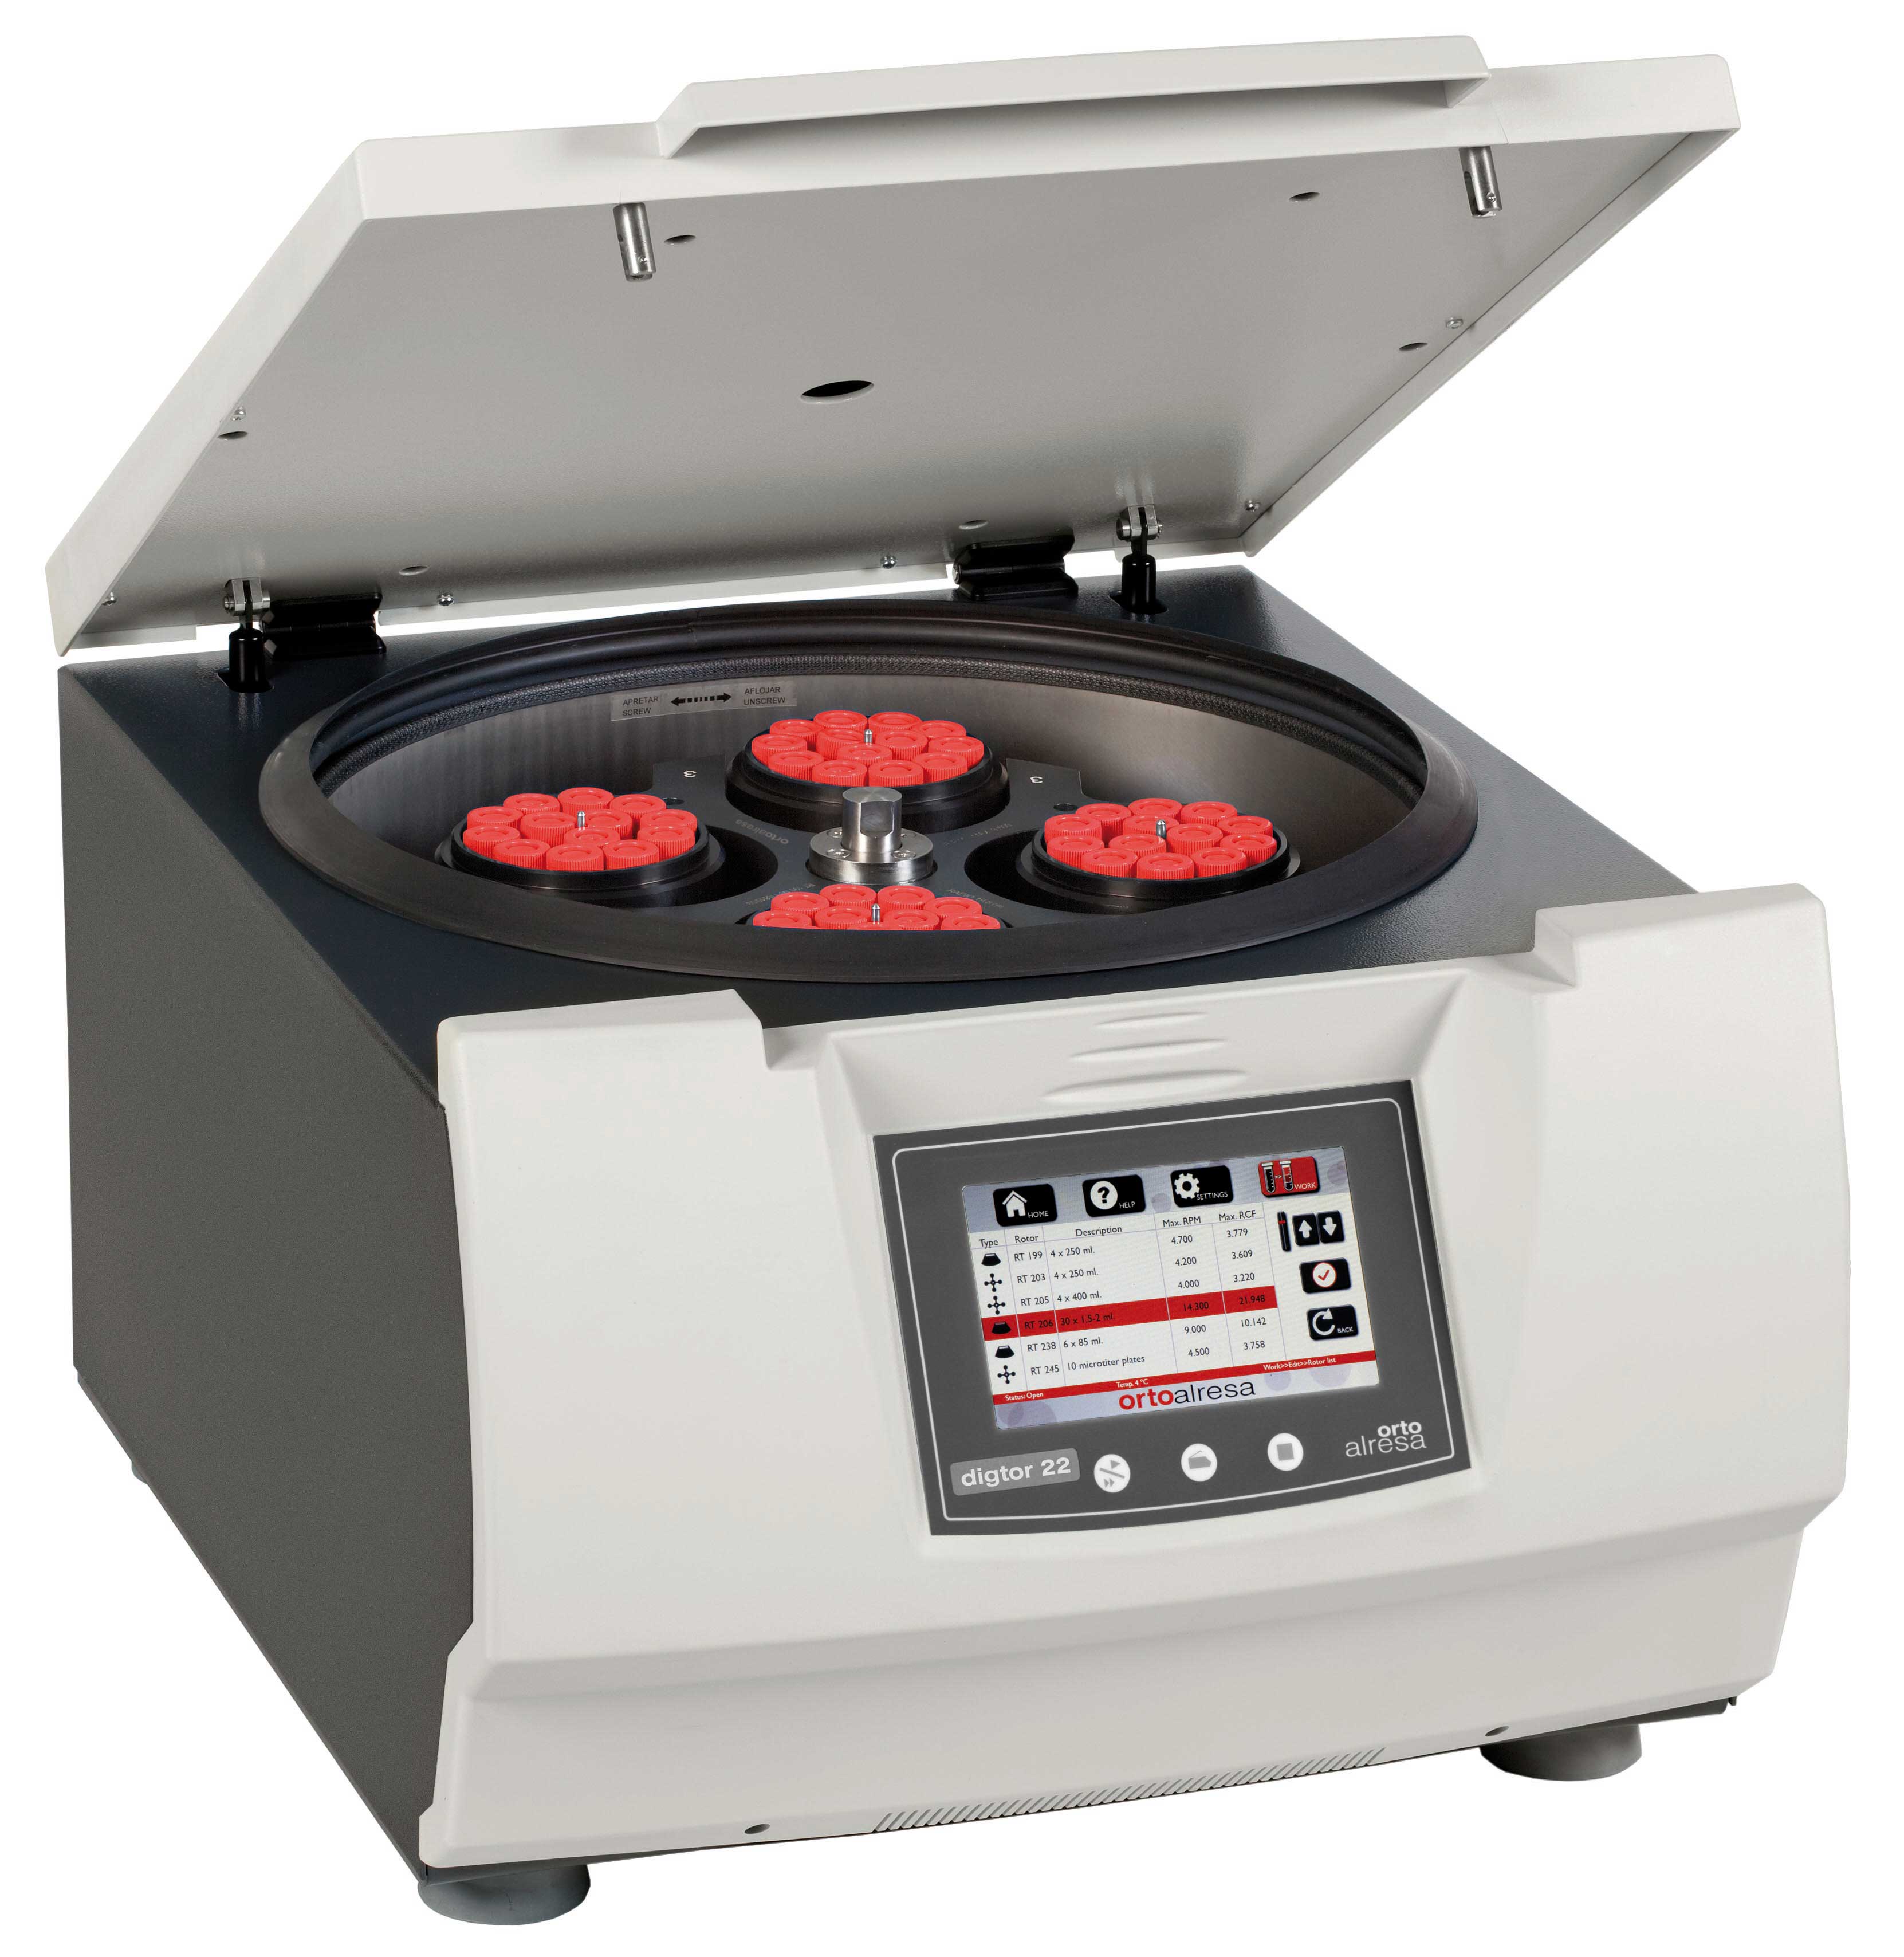 Centrifuge Digtor 22/22R. ORTOALRESA. Centrifuge (rotor not included). Model: Digtor 22. Refrigerated: No. Dim. WxHxD (mm): 650x390x540. Weight (Kg): 50. Voltage (V): 220-230. Frequency (Hz): 50-60. Consumption (W): 1020